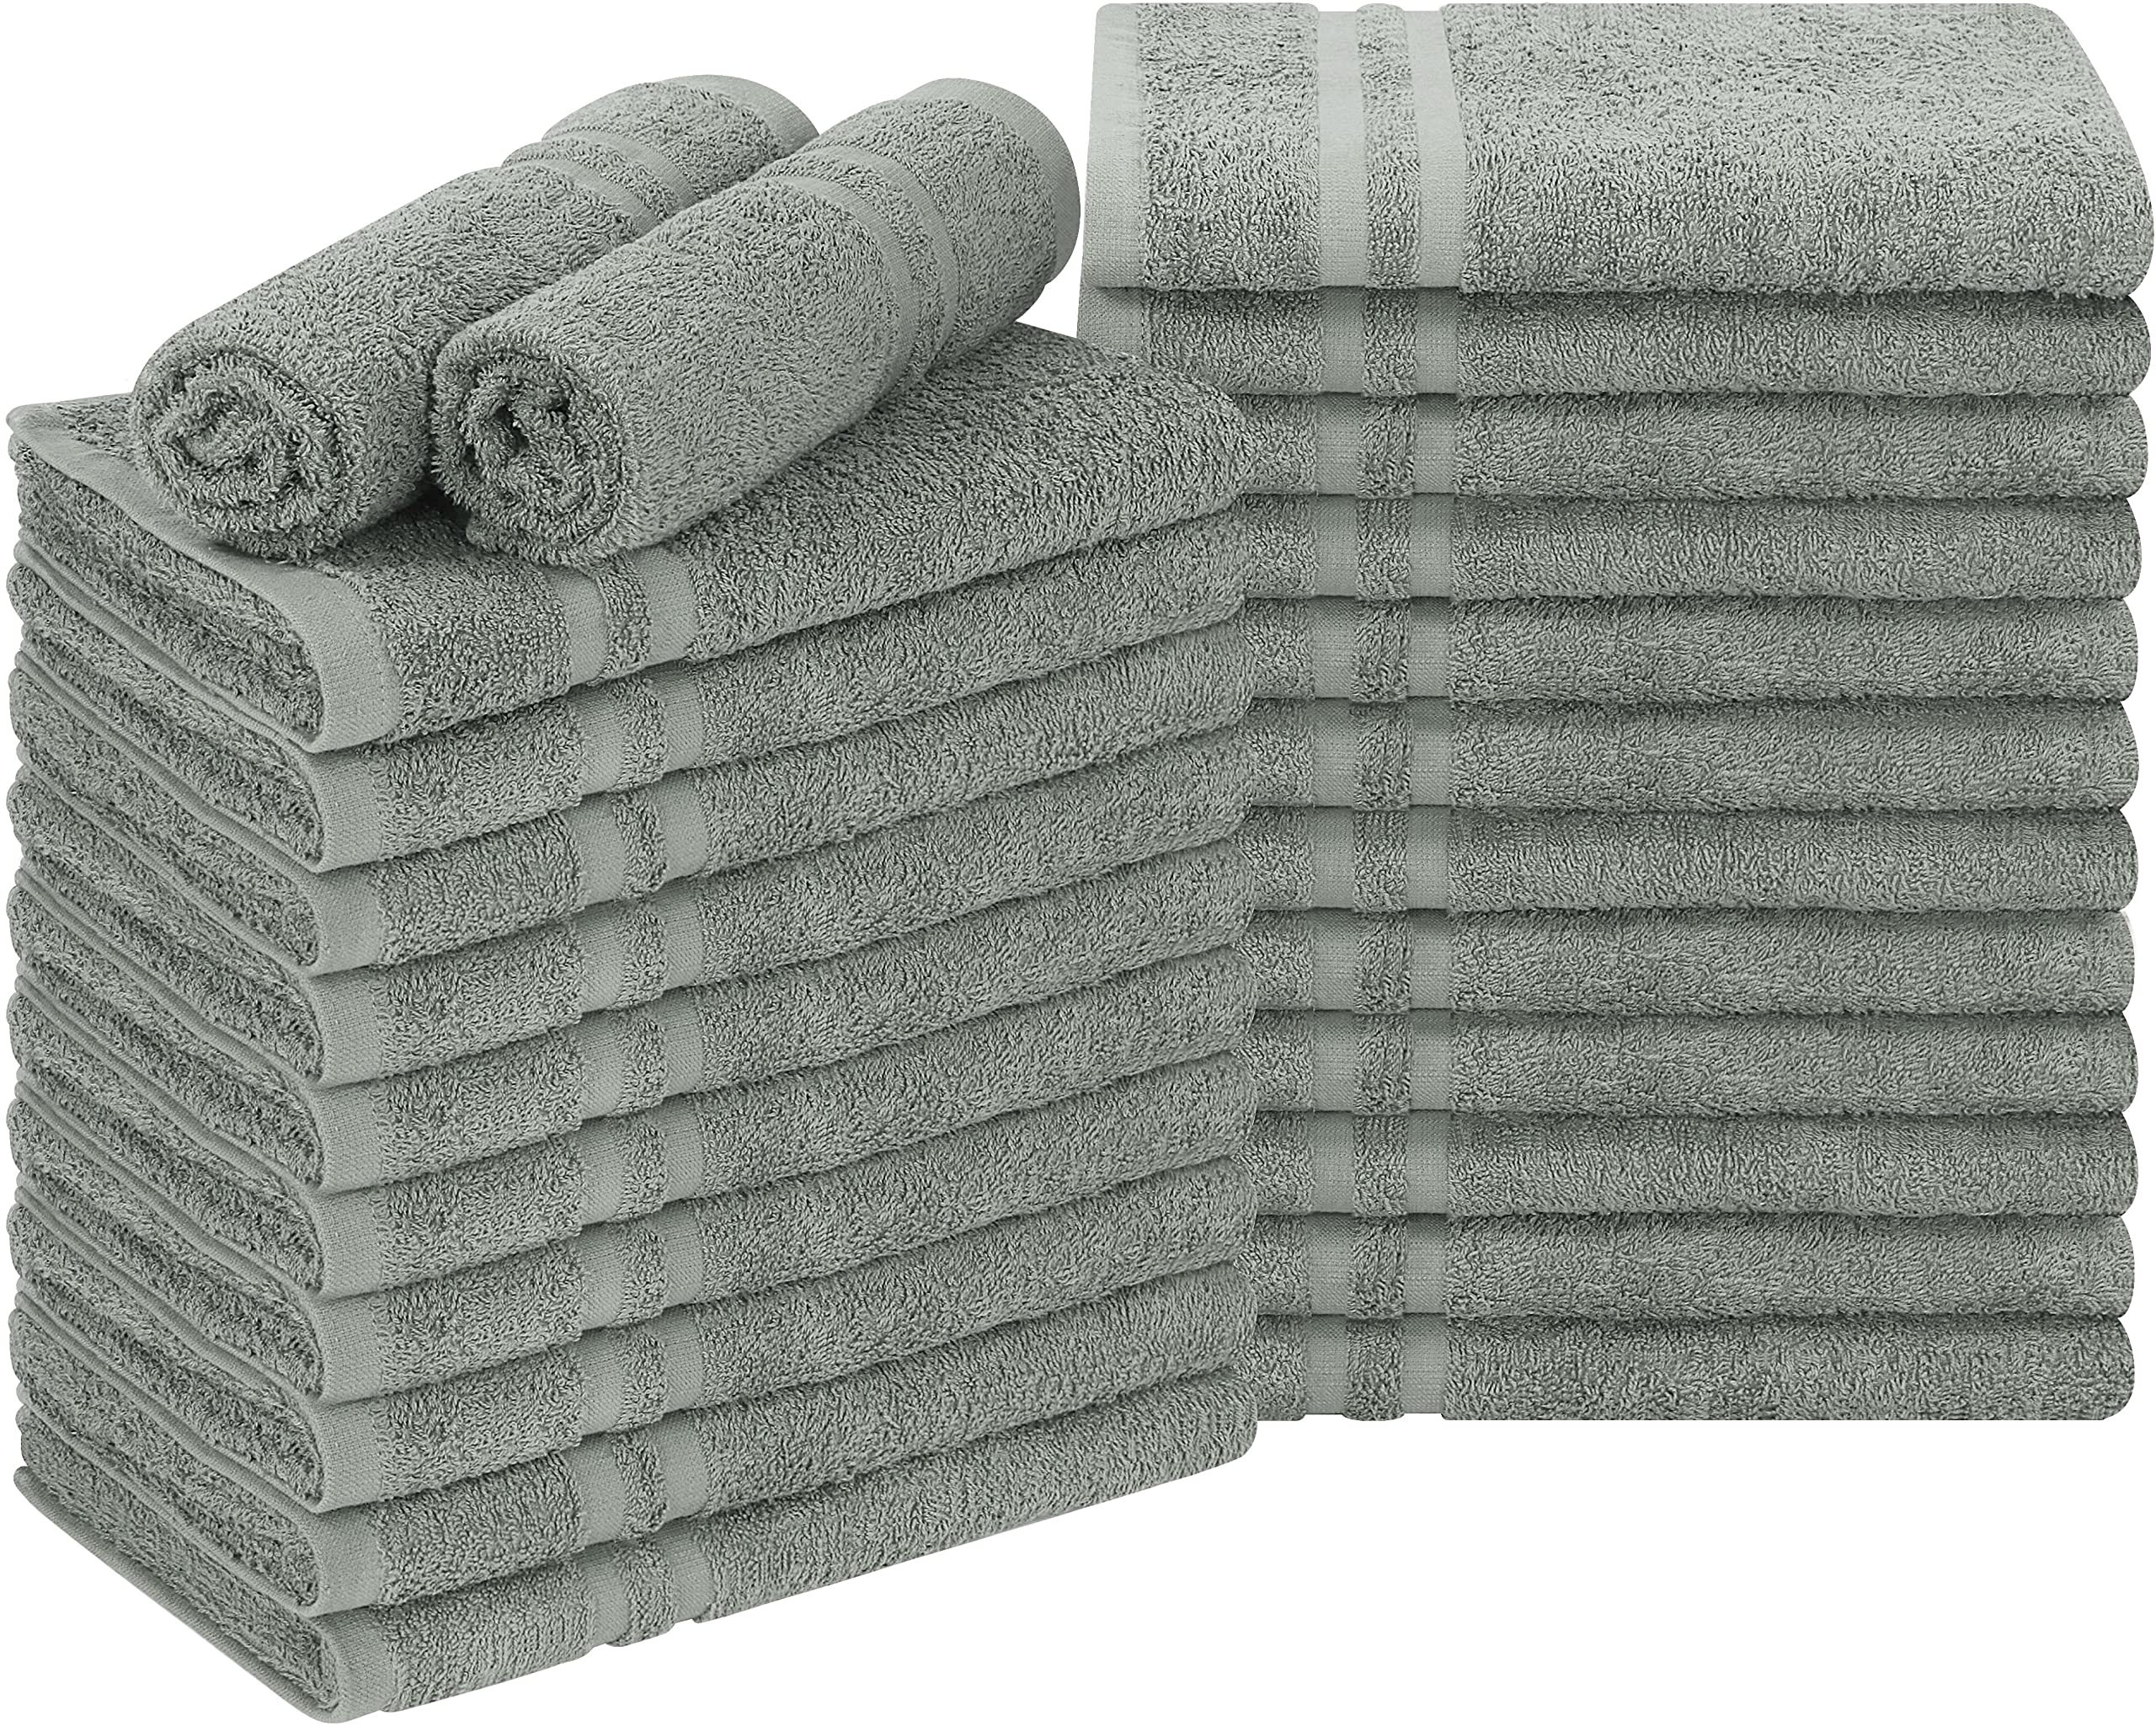 Oakias Kitchen Towels Grey (12 Pack, 16 x 26 Inches) – Cotton